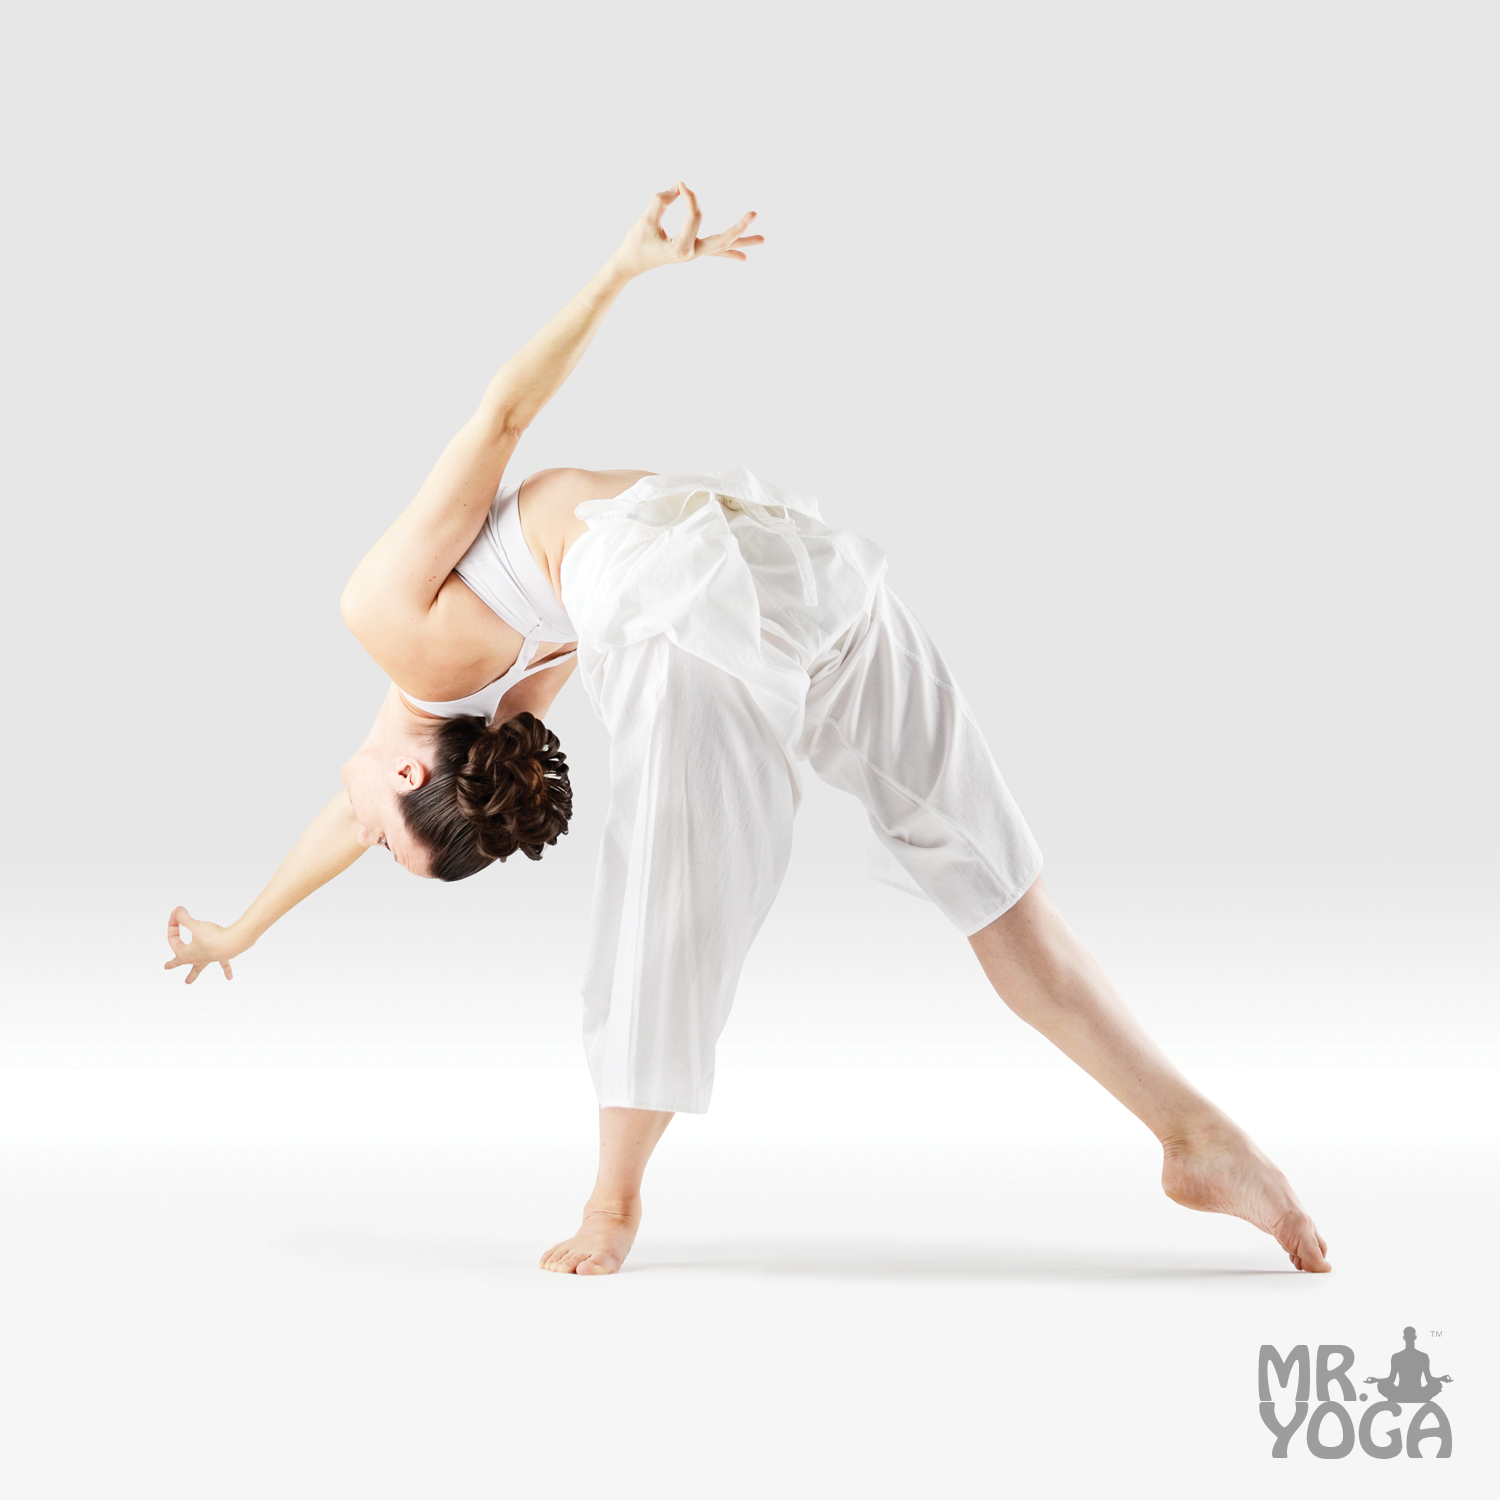 Parvati's Graceful Dance Pose • Mr. Yoga ® Is Your #1 Authority on ...